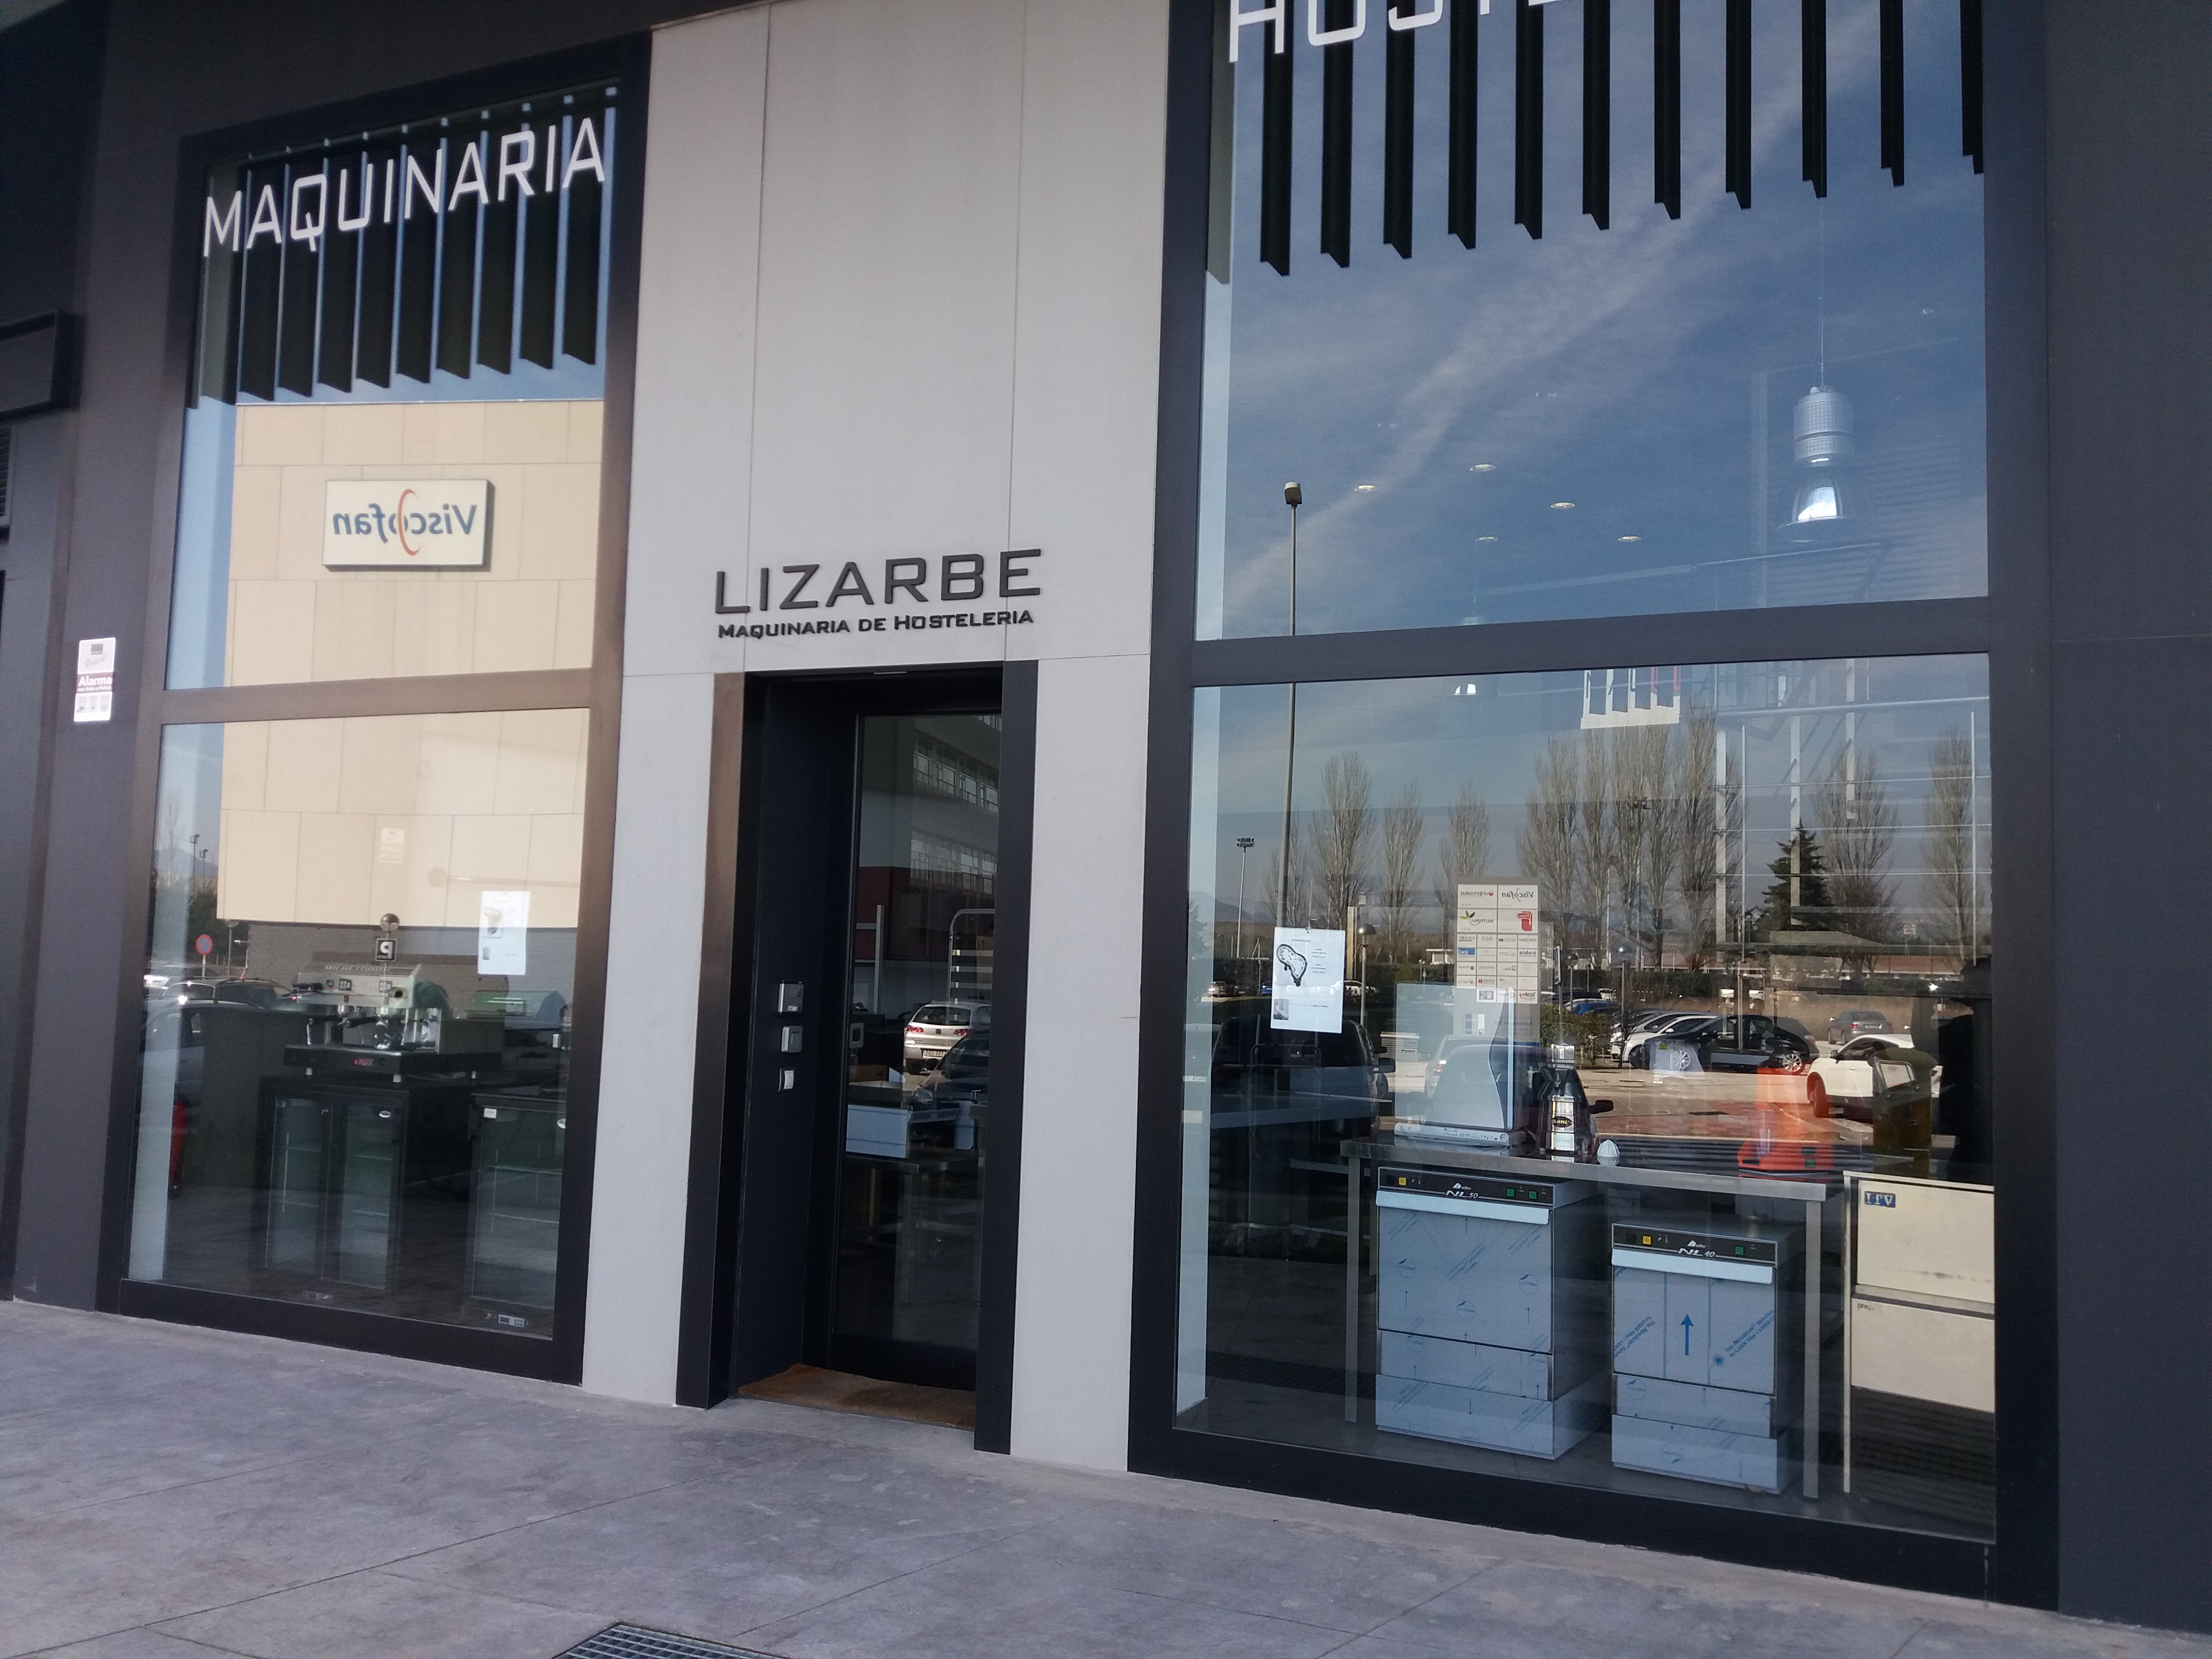 Images Comercial Lizarbe